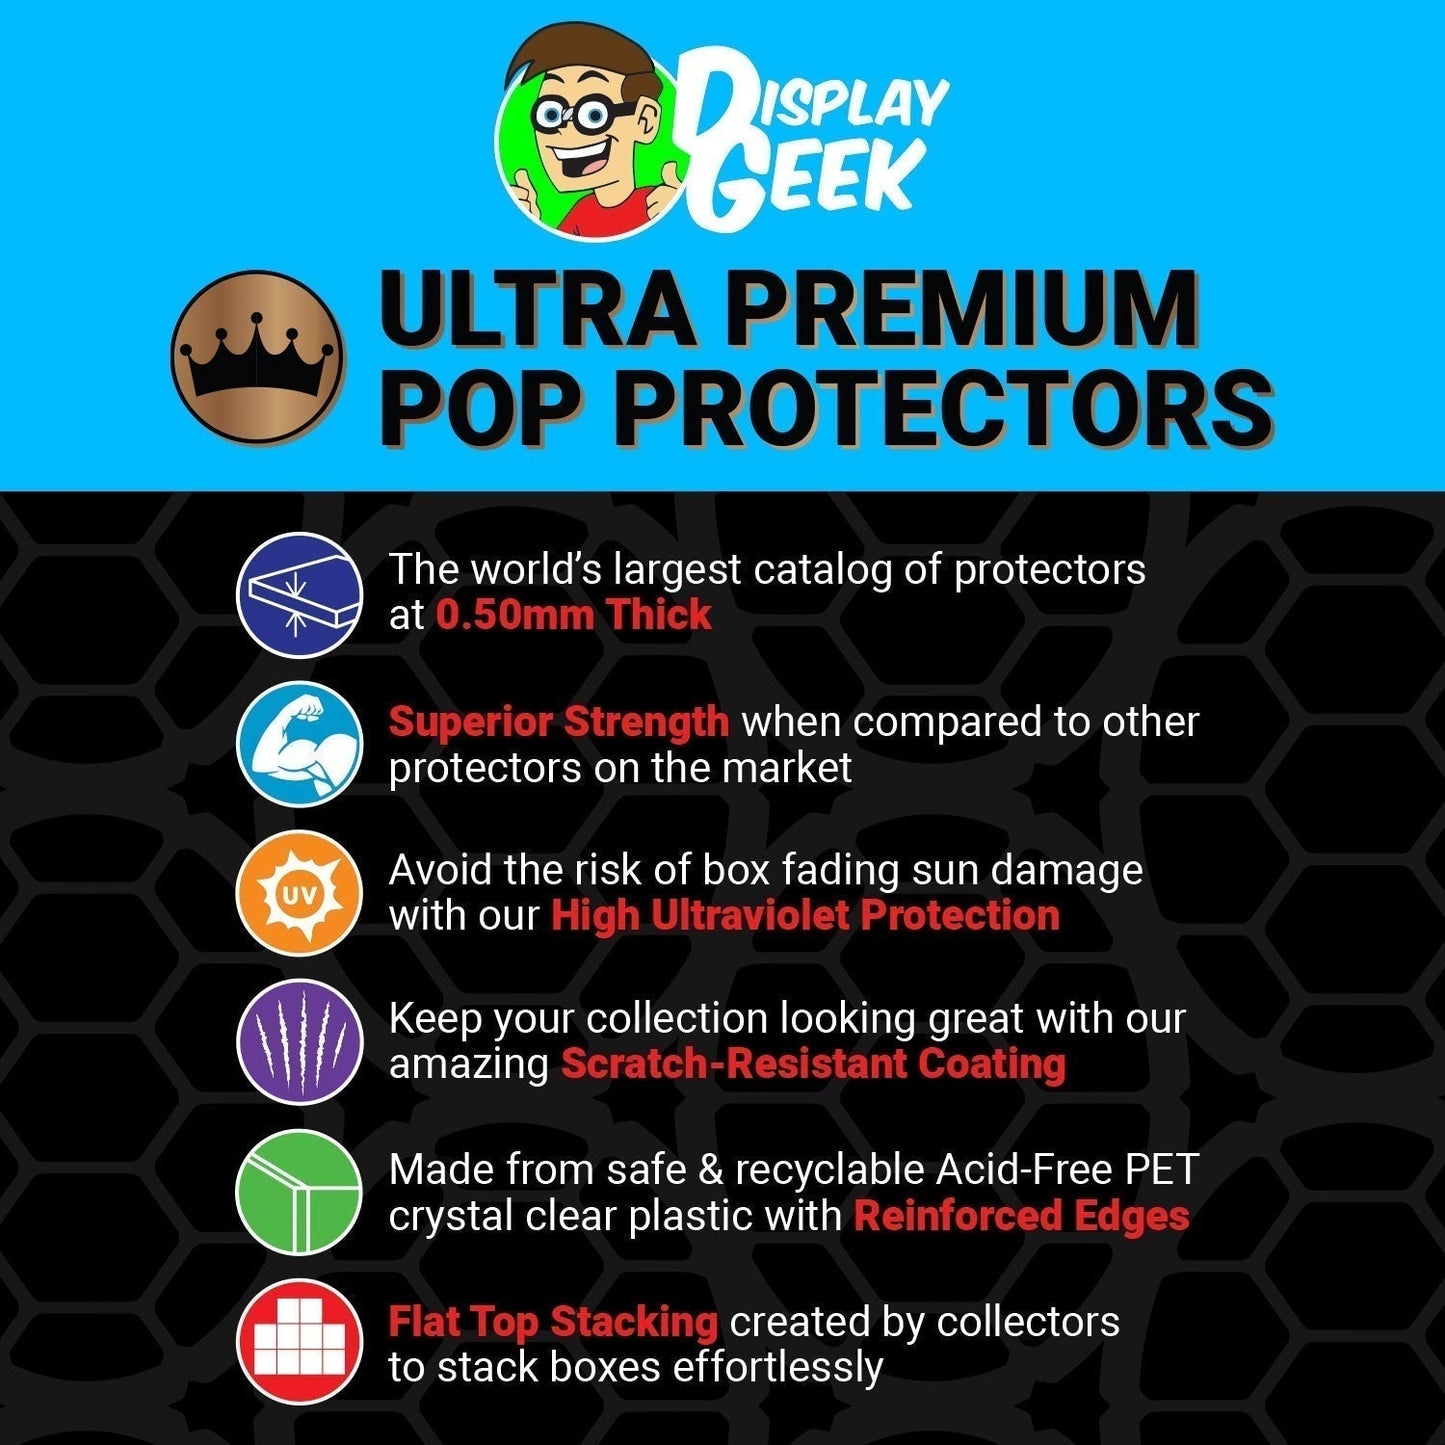 Pop Protector for Pop & Tee Corpse Bride Emily Blacklight #1370 Funko Box - PPG Pop Protector Guide Search Created by Display Geek